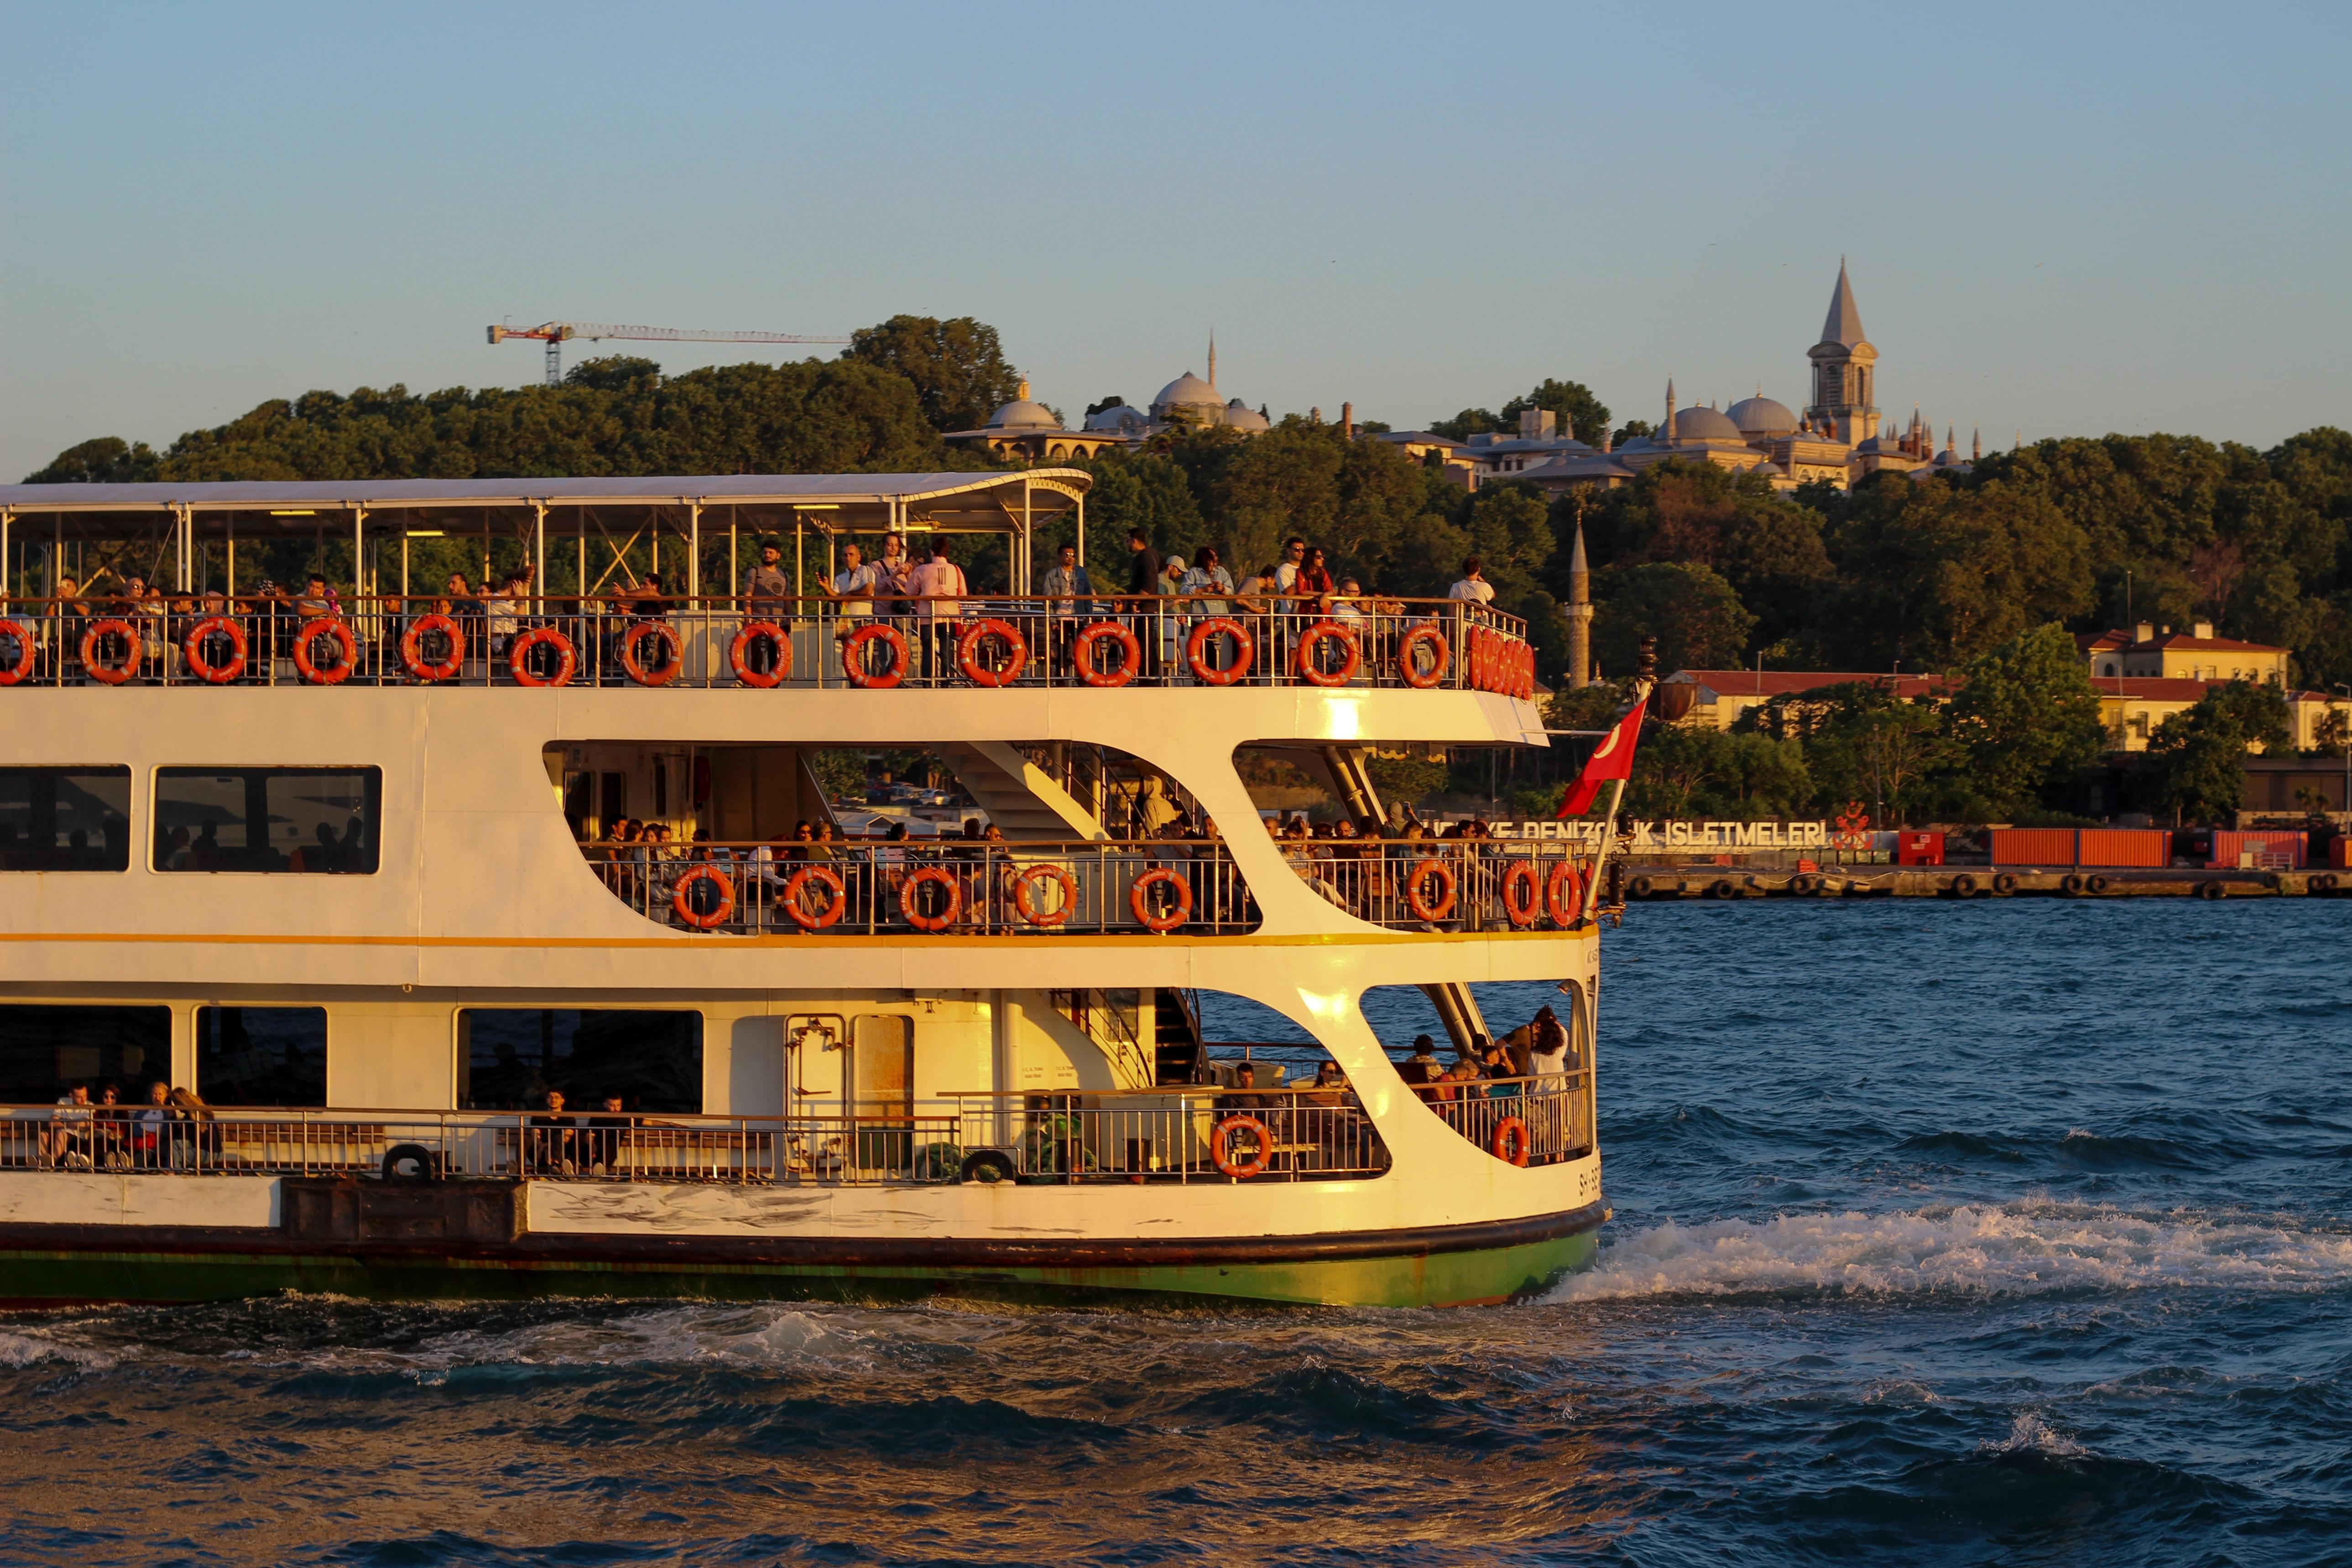 A Cruise in the ocean of Istanbul